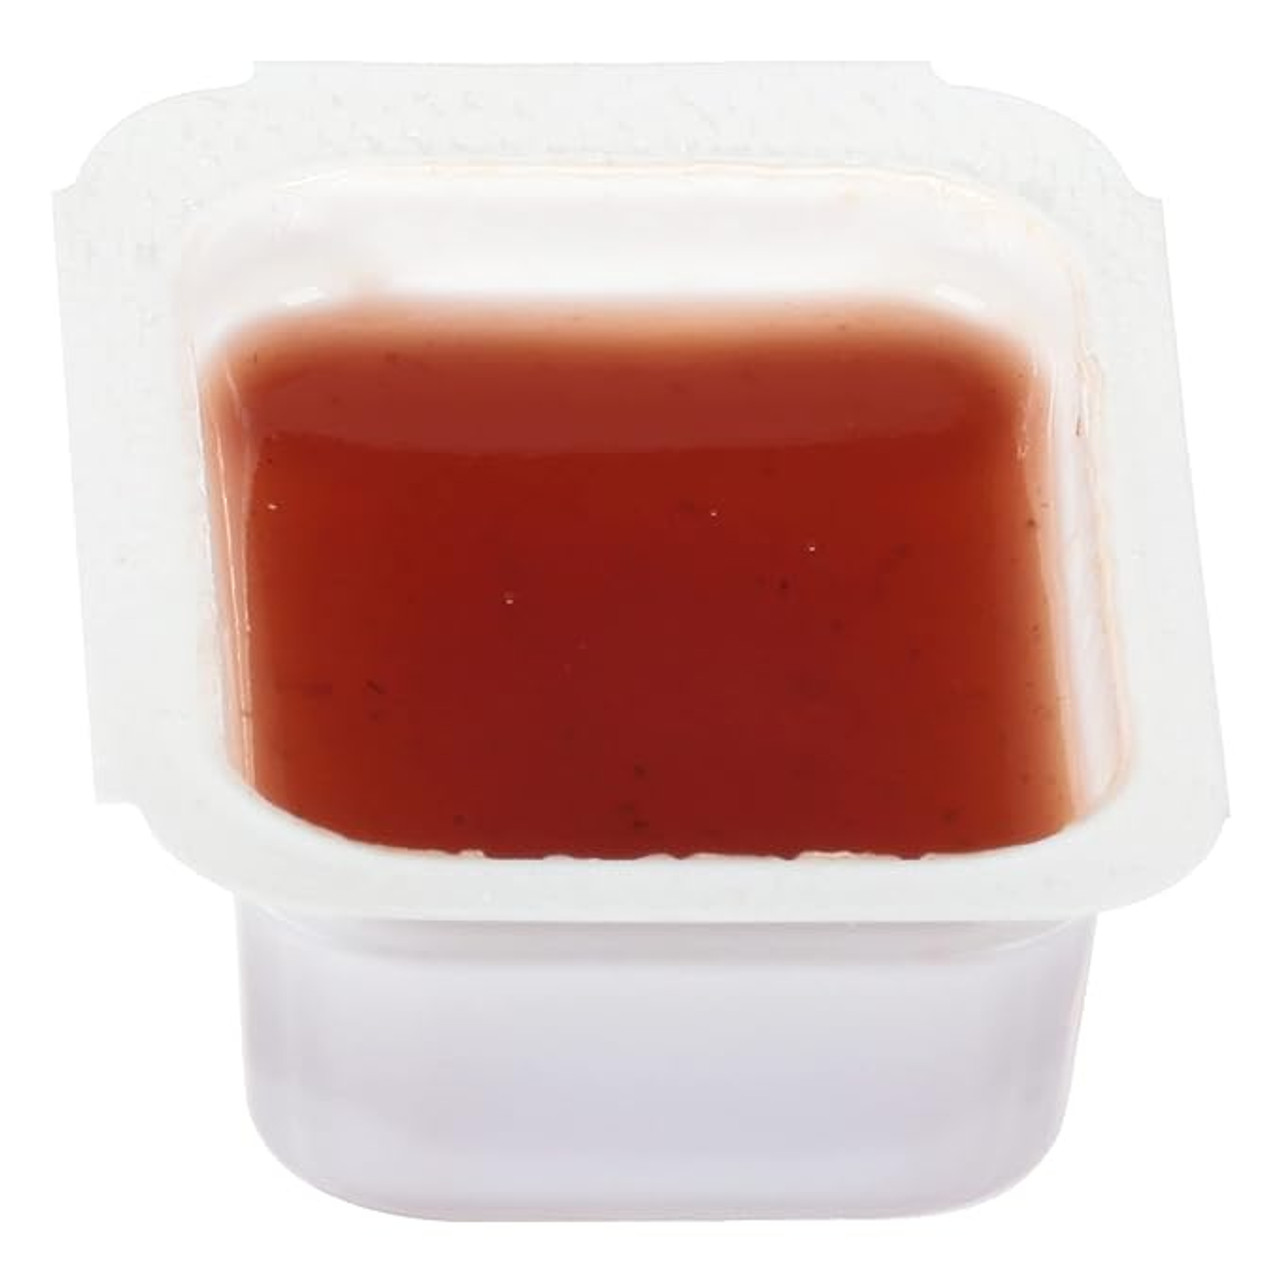 Heinz Strawberry Jam Portion Cups - 0.5 oz. (200/Case), Fresh and Sweet - Chicken Pieces